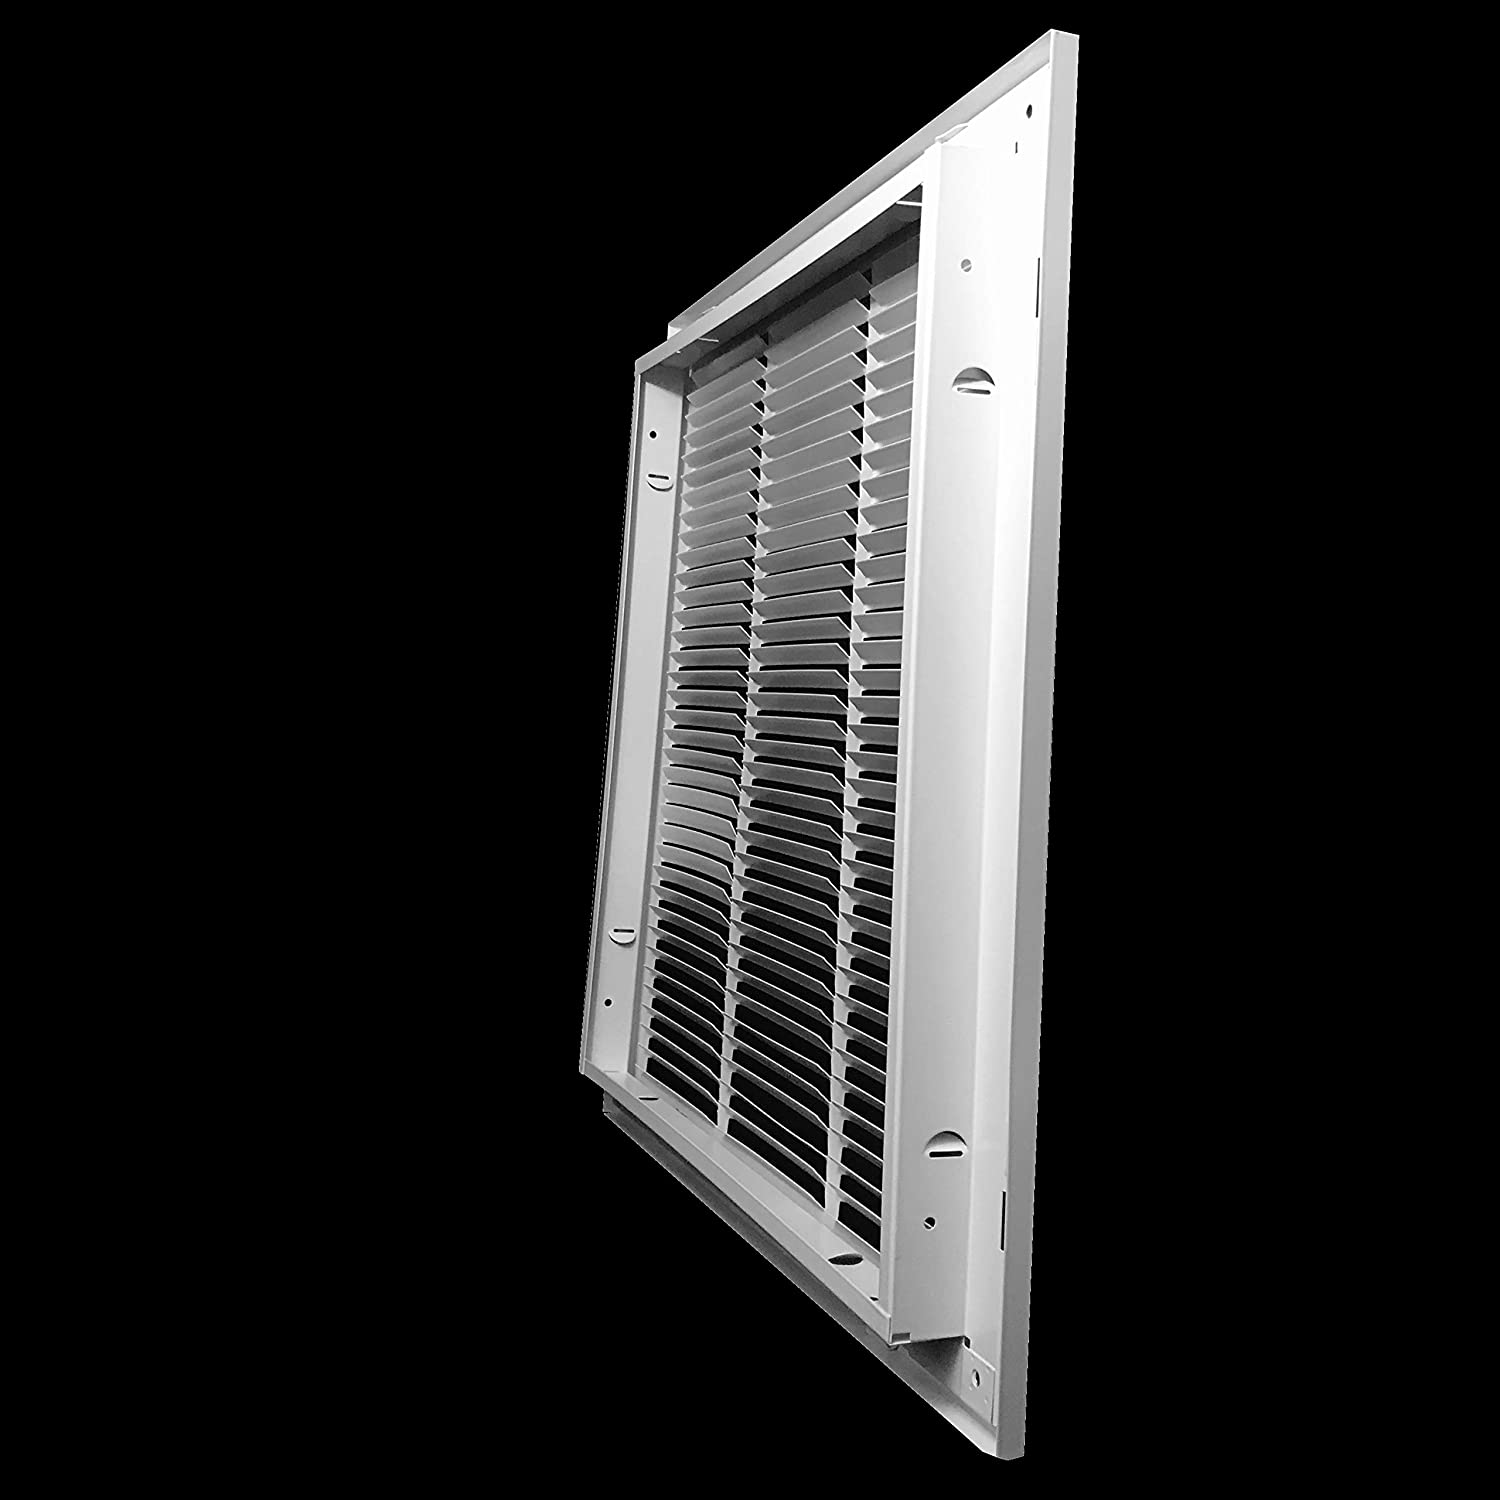 14" X 20" Duct Opening | Steel Return Air Filter Grille for Sidewall and Ceiling